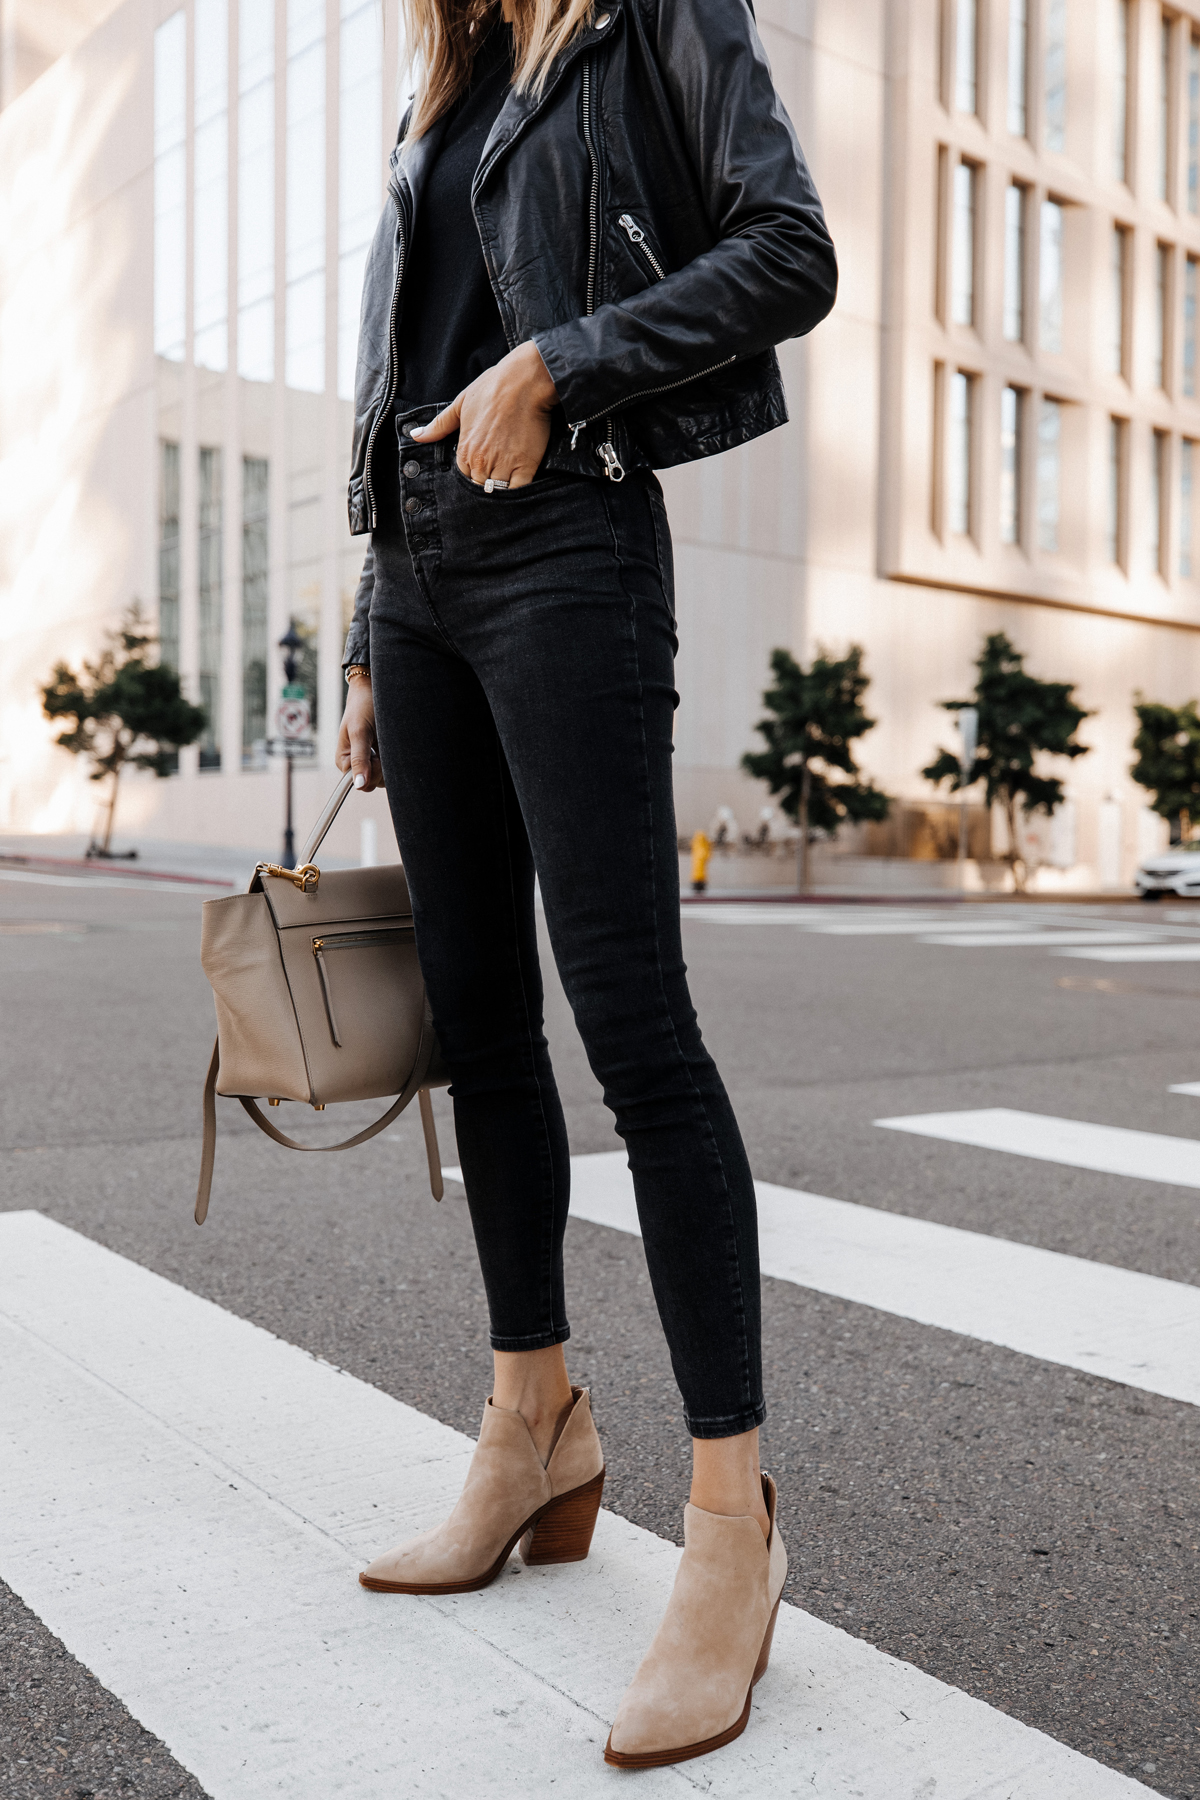 Fashion Jackson Wearing Madewell Black Leather Jacket Black Jeans Vince Camuto Gigetta Tan Suede Booties